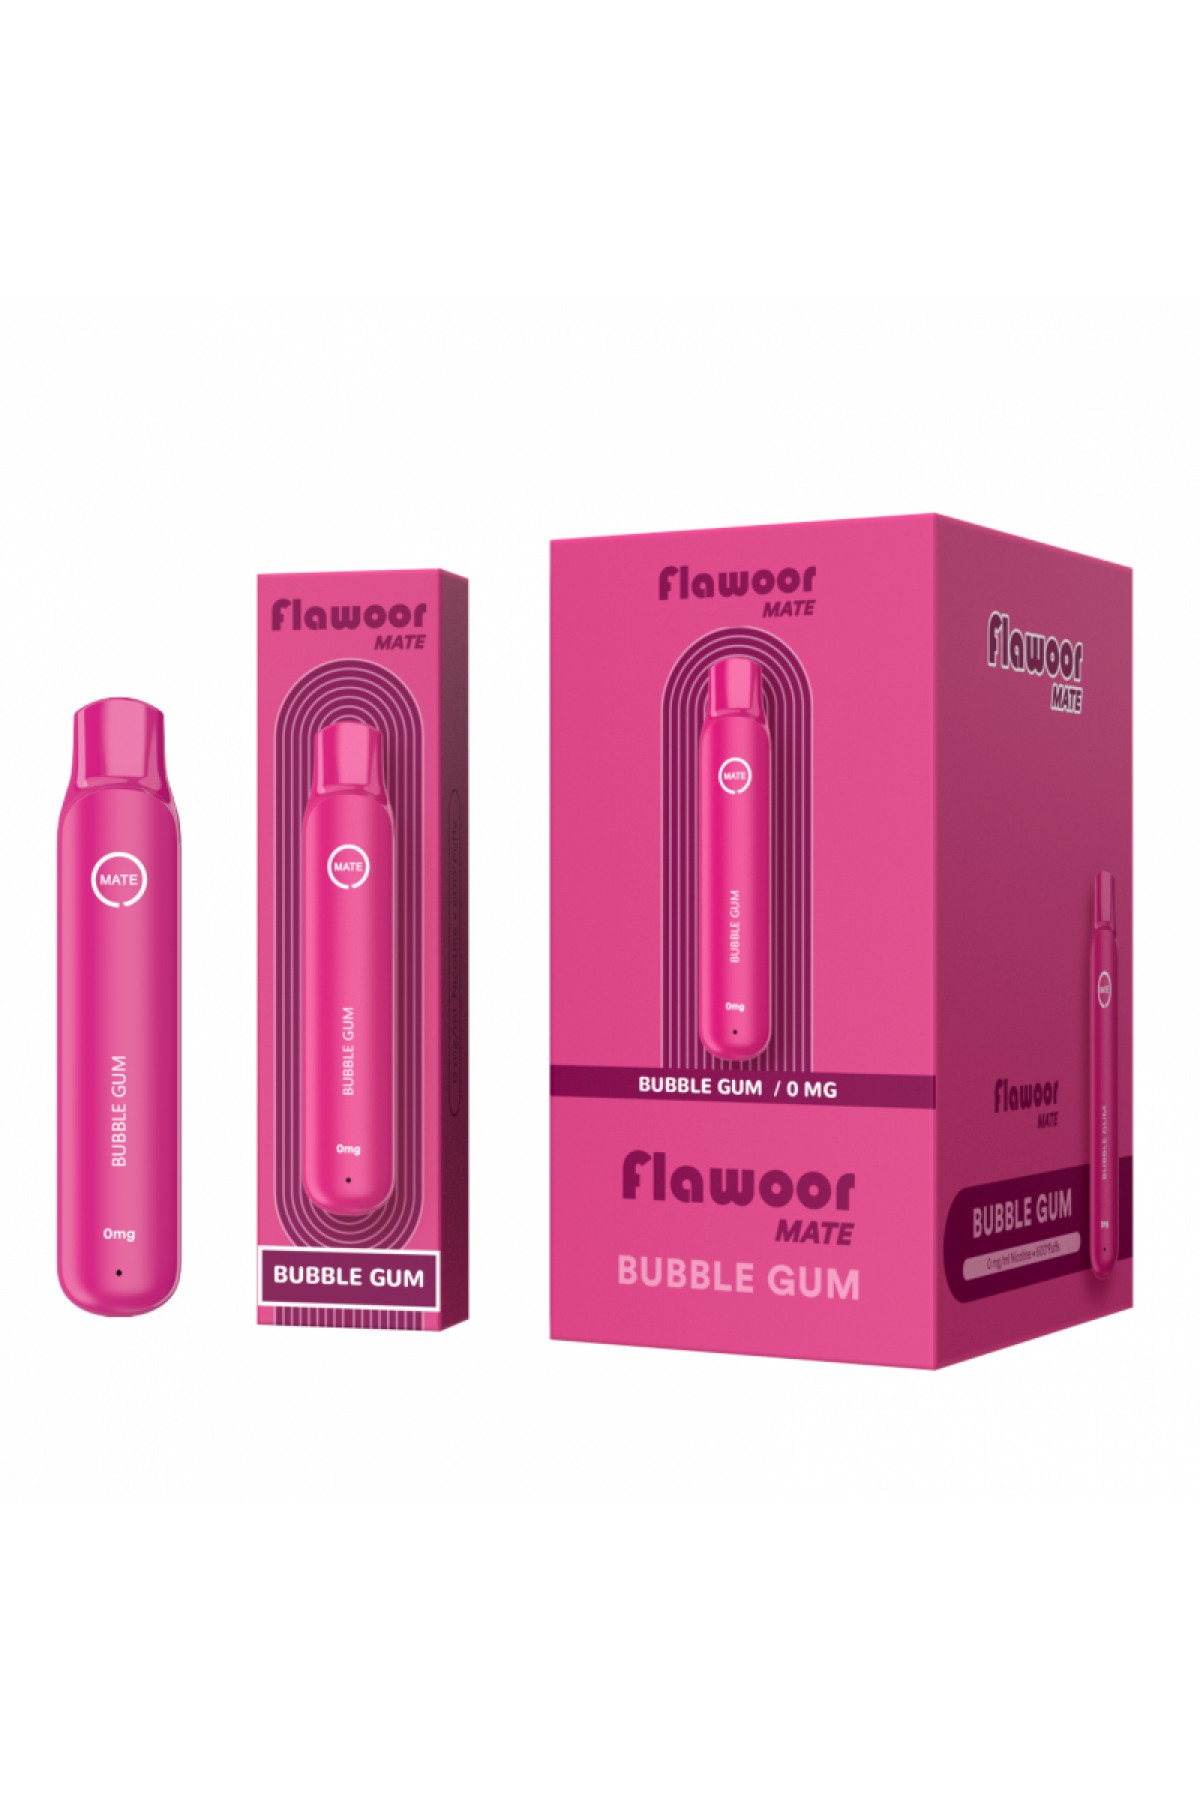 Flawoor Mate - Bubble Gum 600 Puff Kit